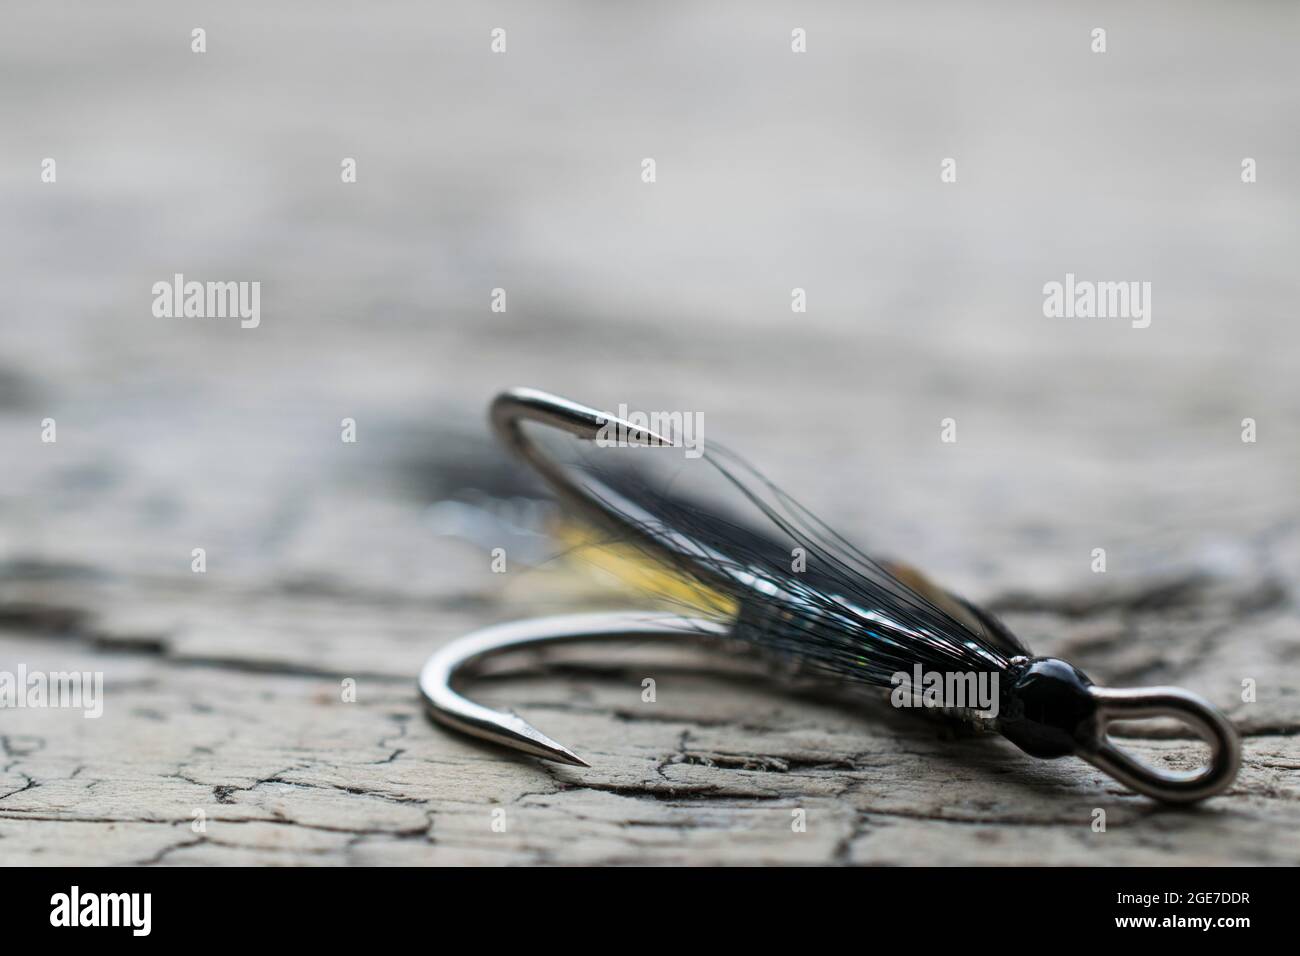 Shiny salmon fishing fly with yellow flash on a wood surface Stock Photo